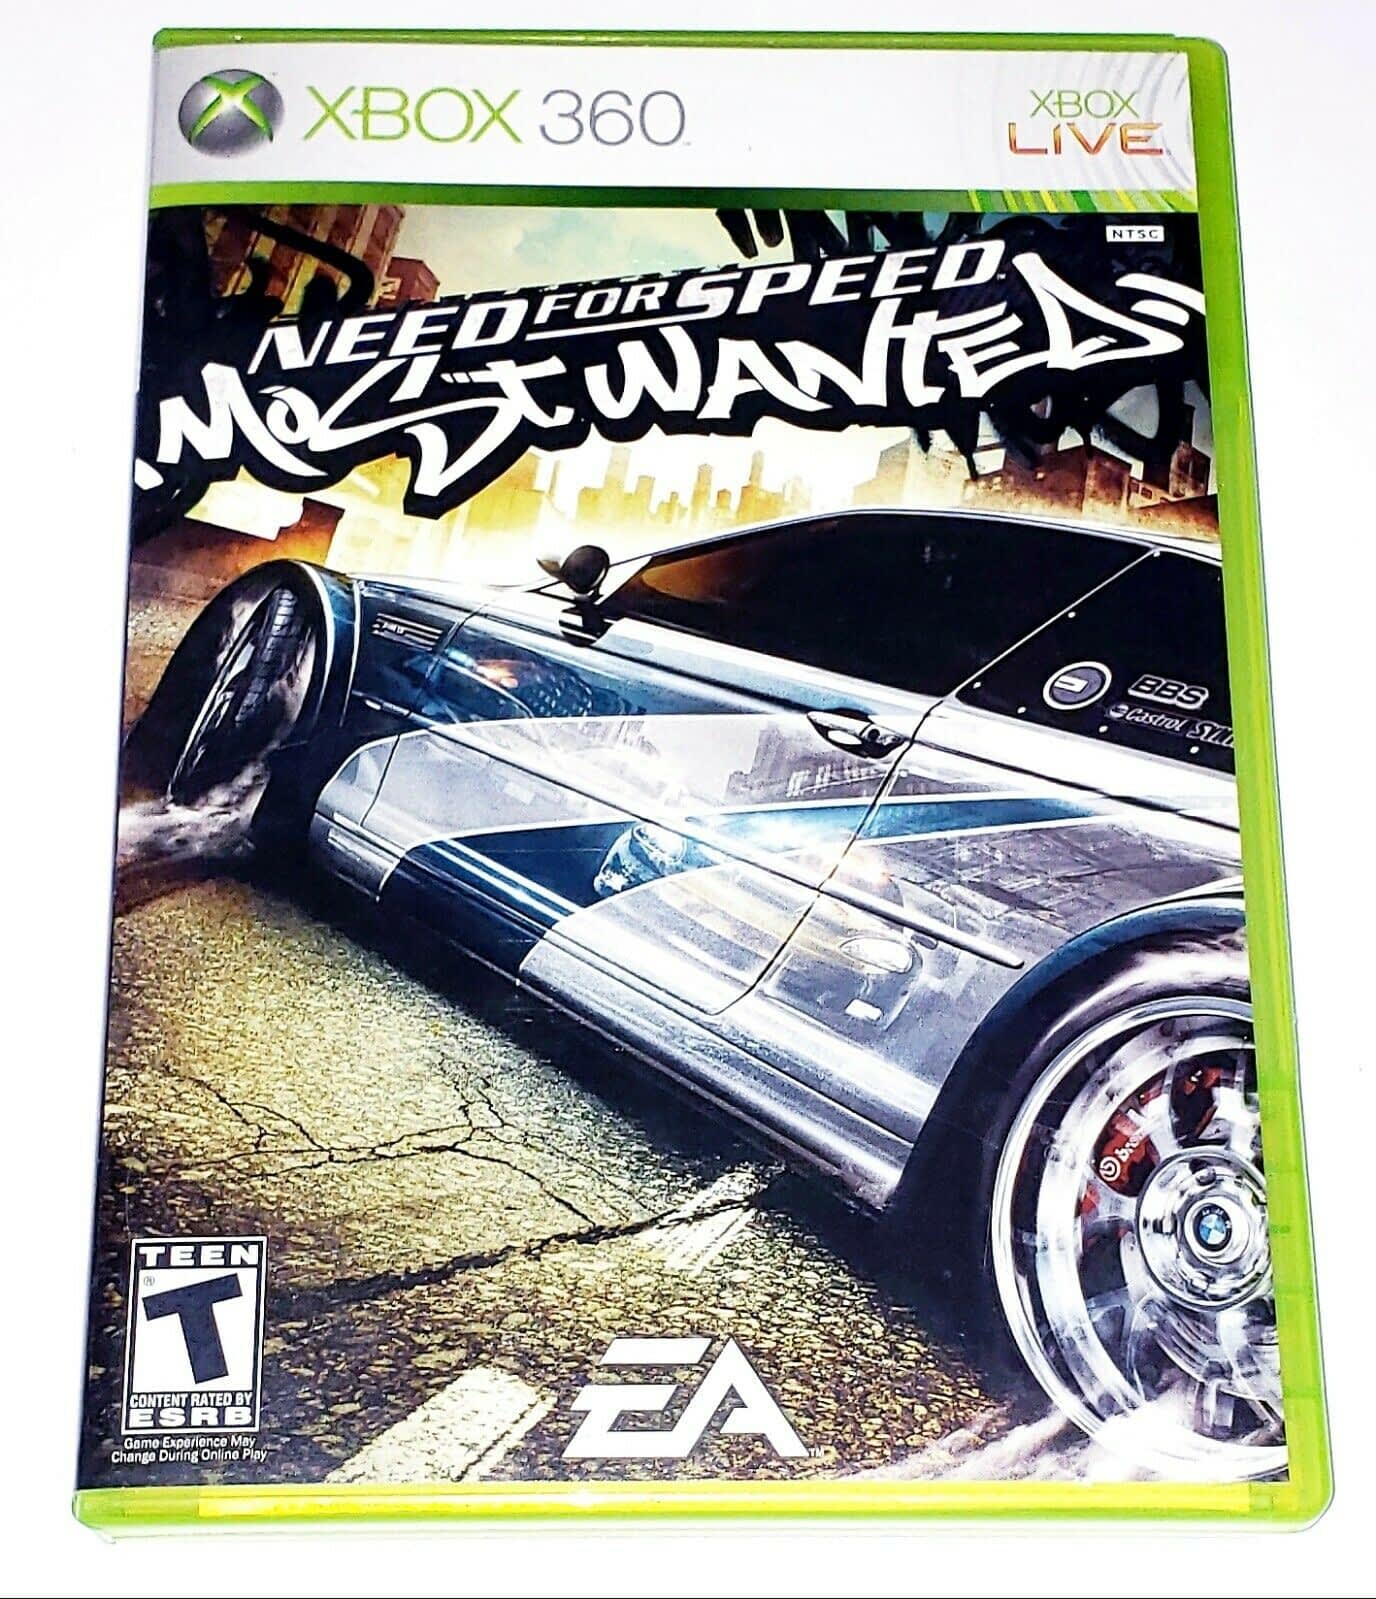 Nfs most wanted xbox. Xbox 360 most wanted Classic диск. NFS most wanted 2005 Xbox 360. Need for Speed most wanted Xbox 360. NFS MW 2005 Xbox 360.